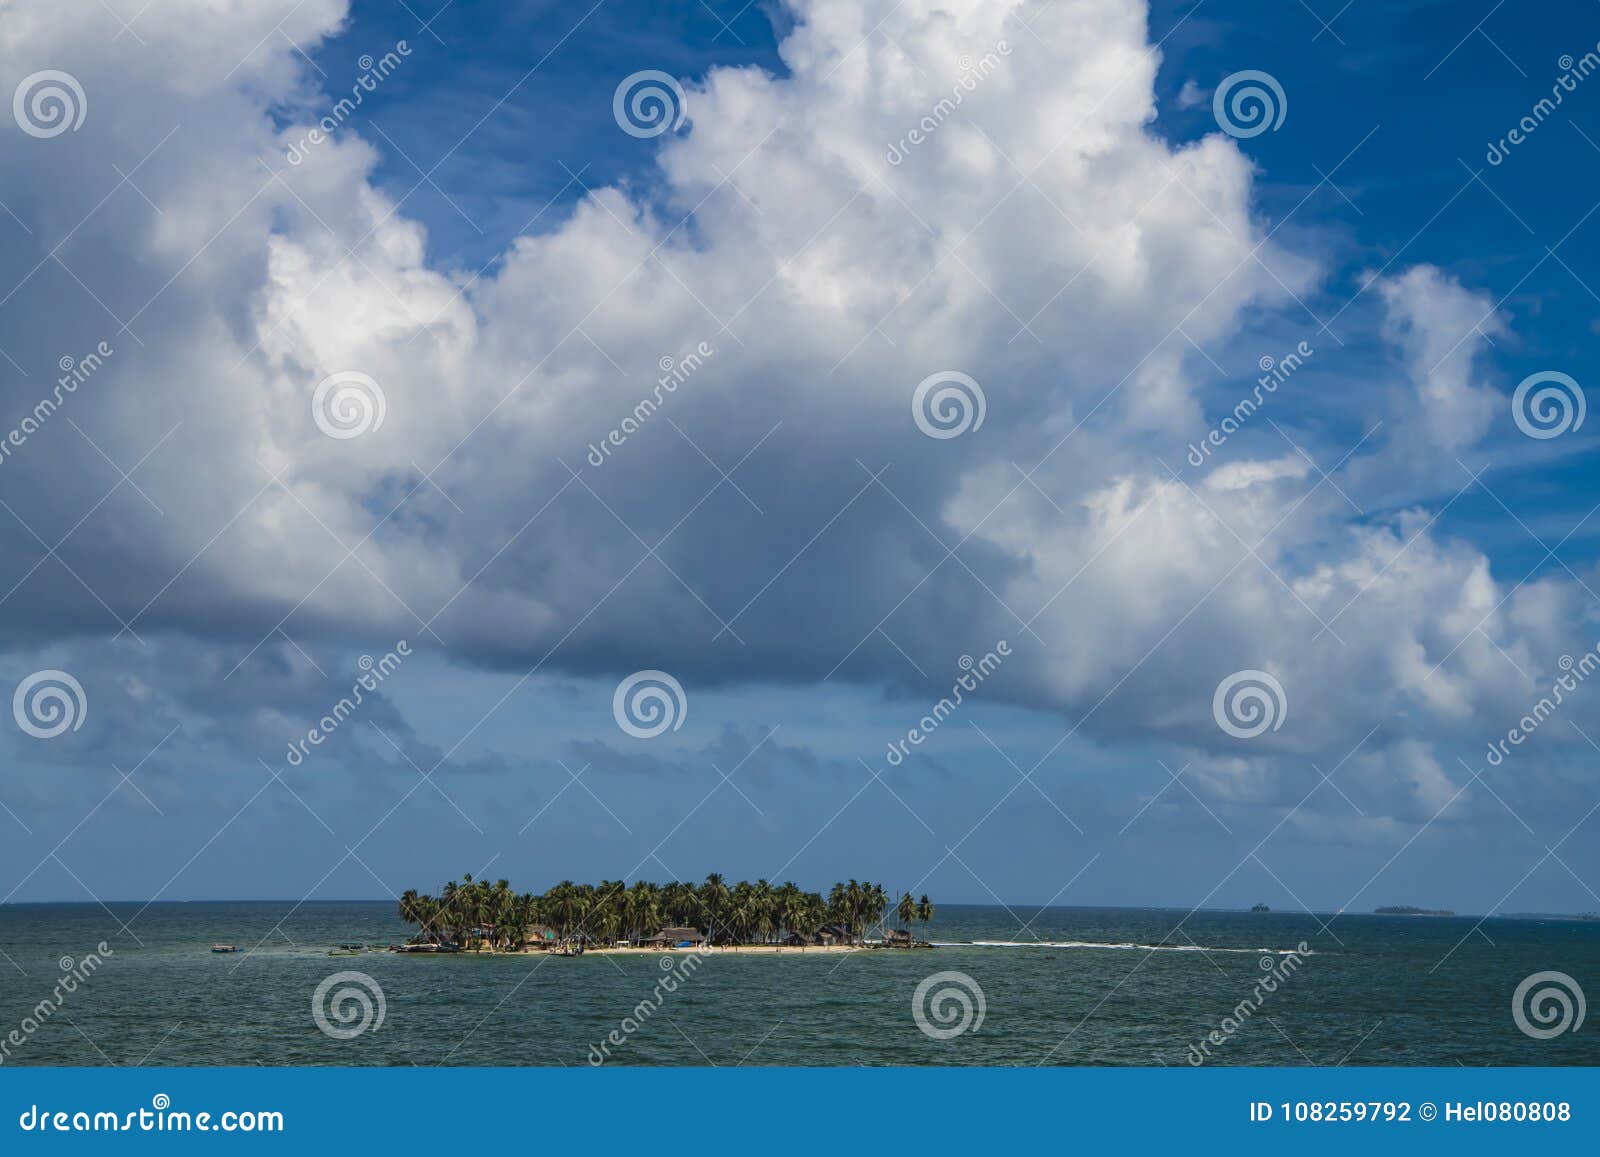 huge clouds over small island in caribbean sea